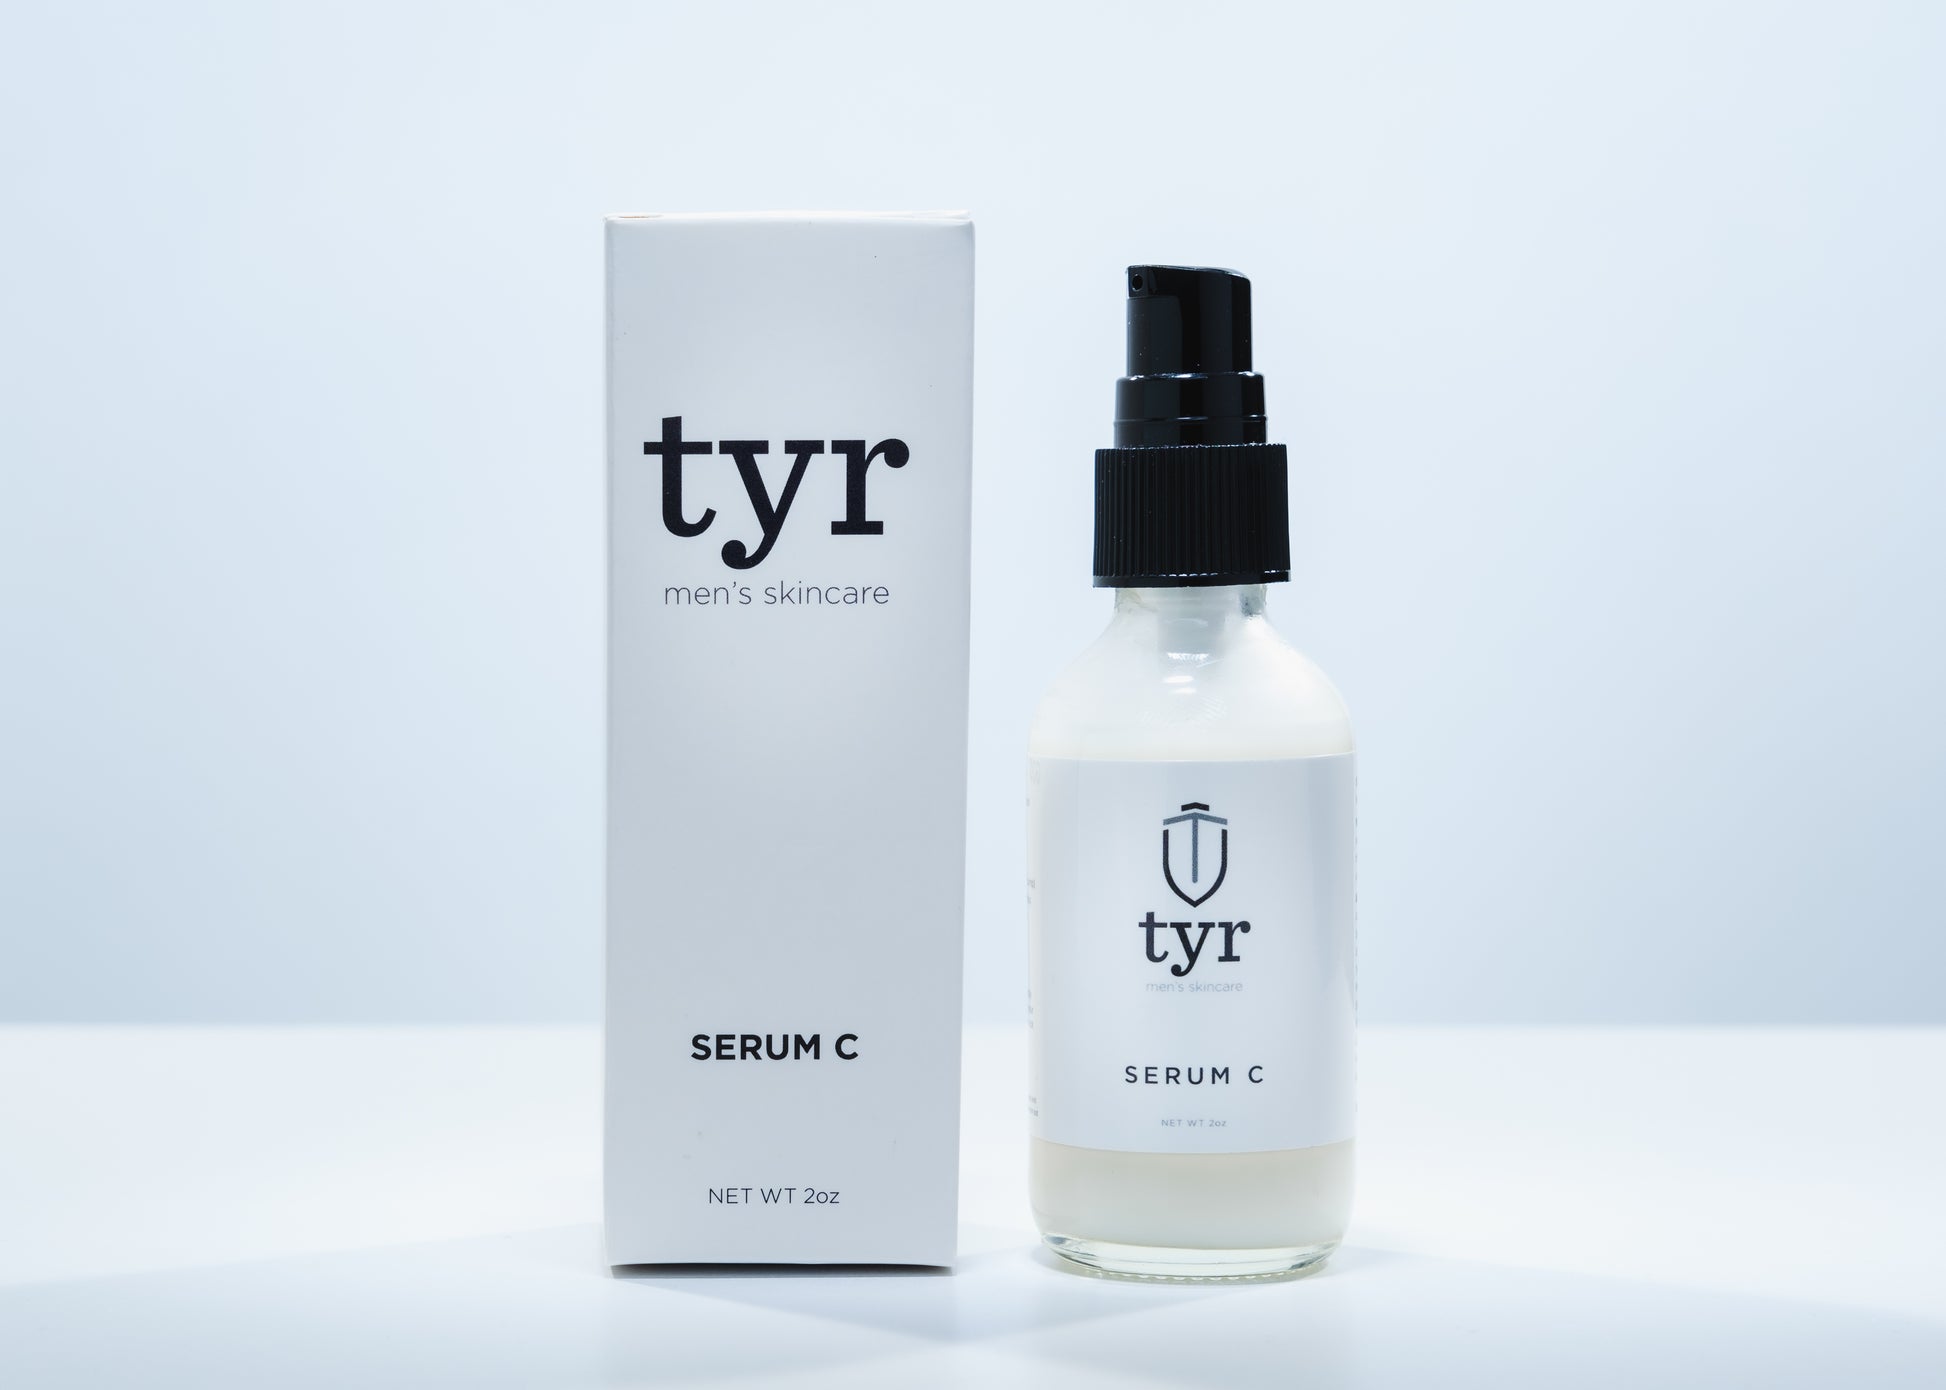 Tyr Skincare for men vitamin C serum with packaging box isolated in white background, close up straight on angle